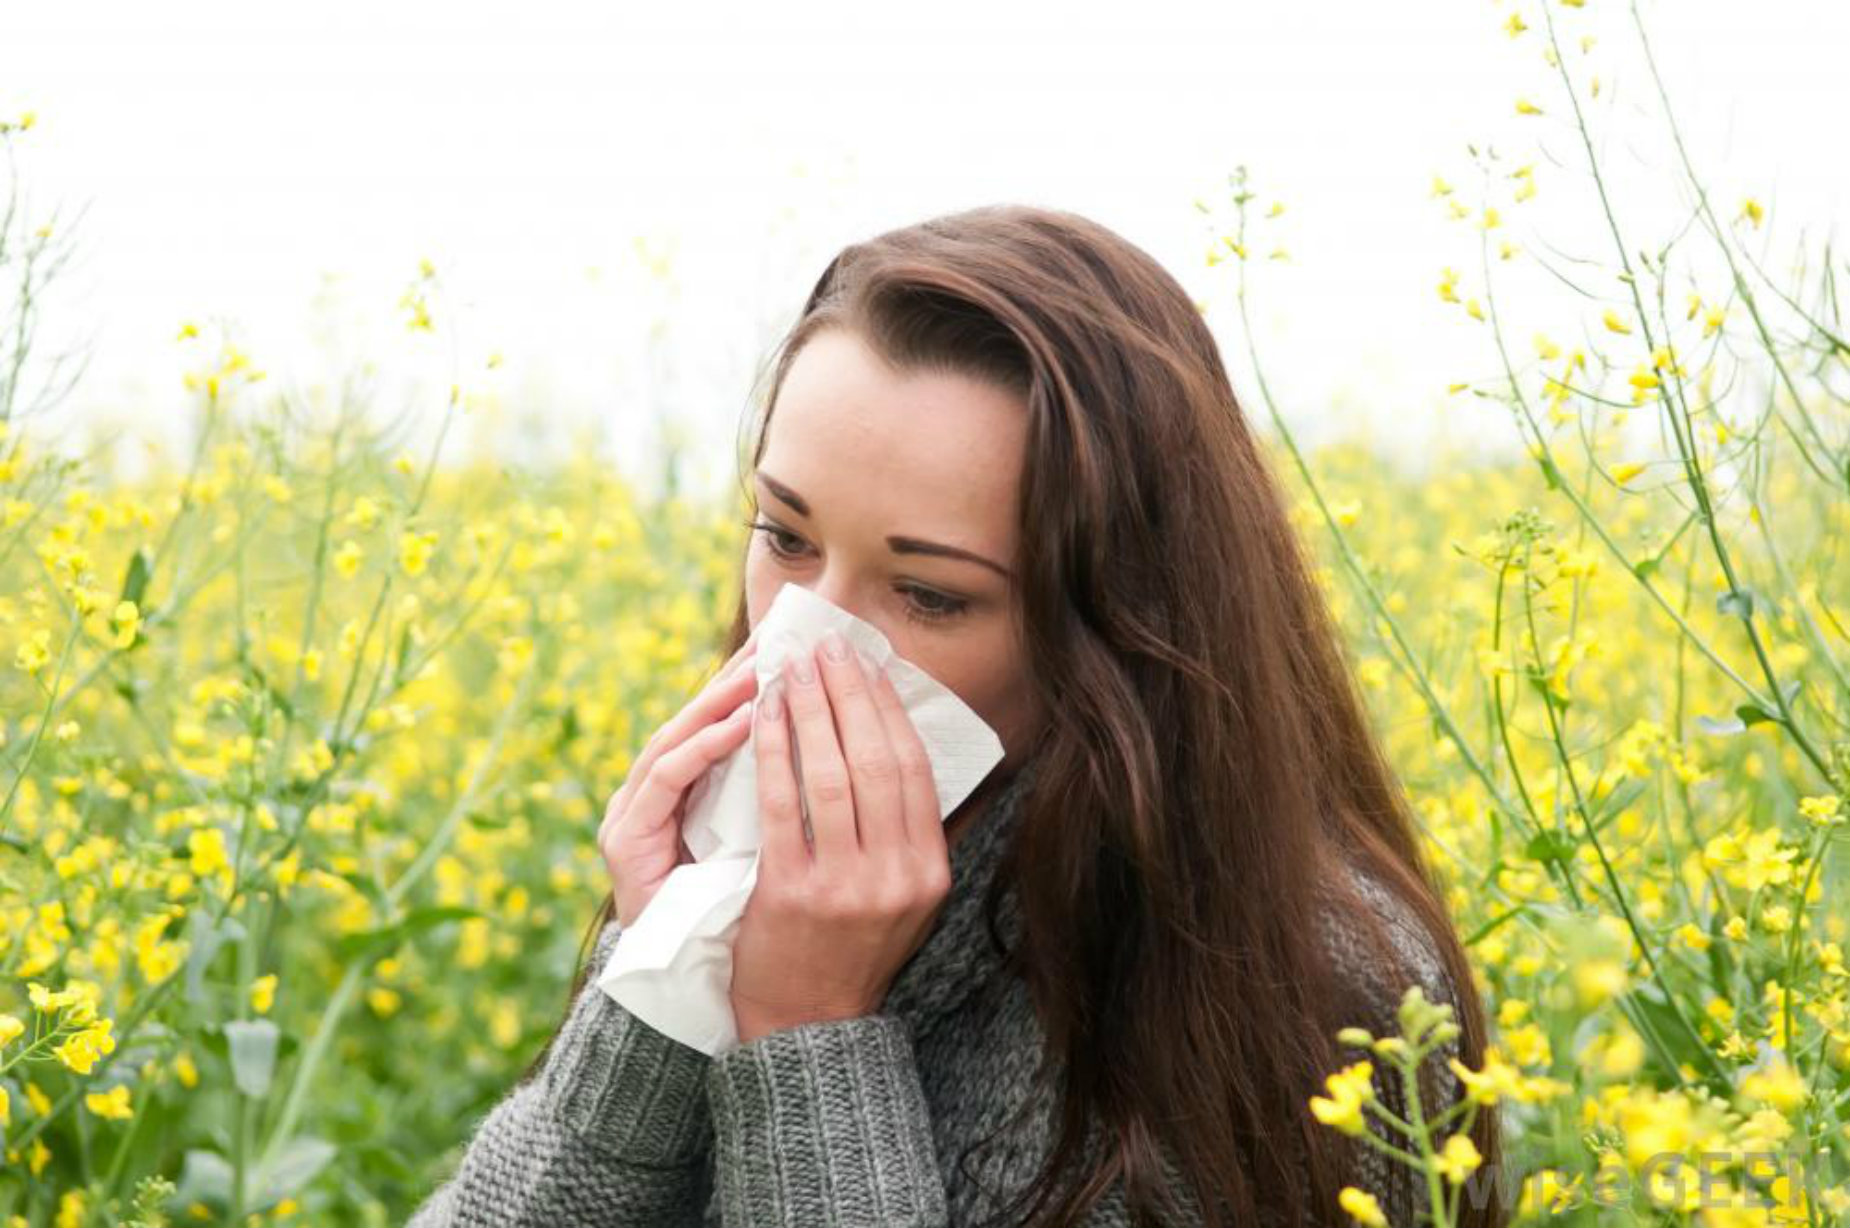 Getting Seasonal Allergies Bad This Year? It’s Not Just You